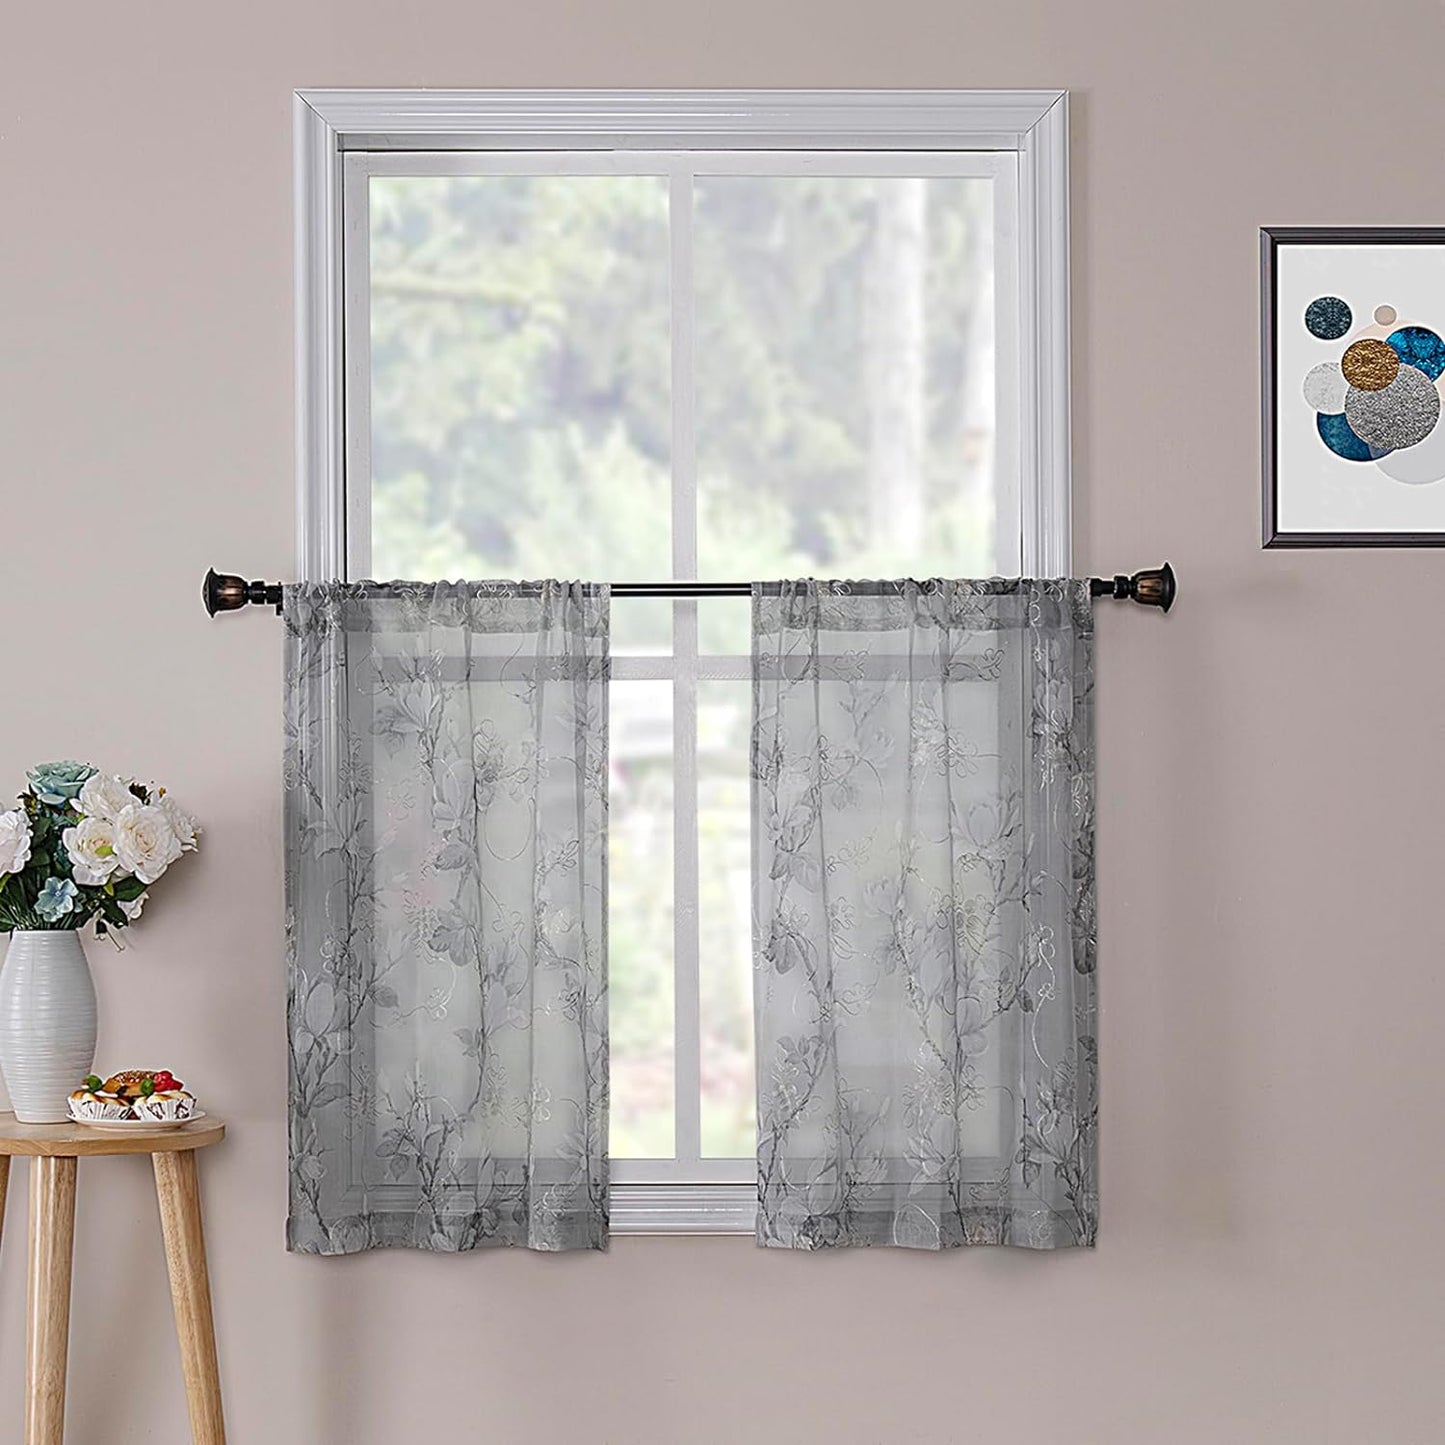 Tollpiz Floral White Sheer Curtain Flower Print Vine Embroidery Bedroom Curtains Rod Pocket Voile Window Curtain for Living Room, 54 X 84 Inches Long, Set of 2 Panels  Tollpiz Tex Grey 30"W X 24"L 